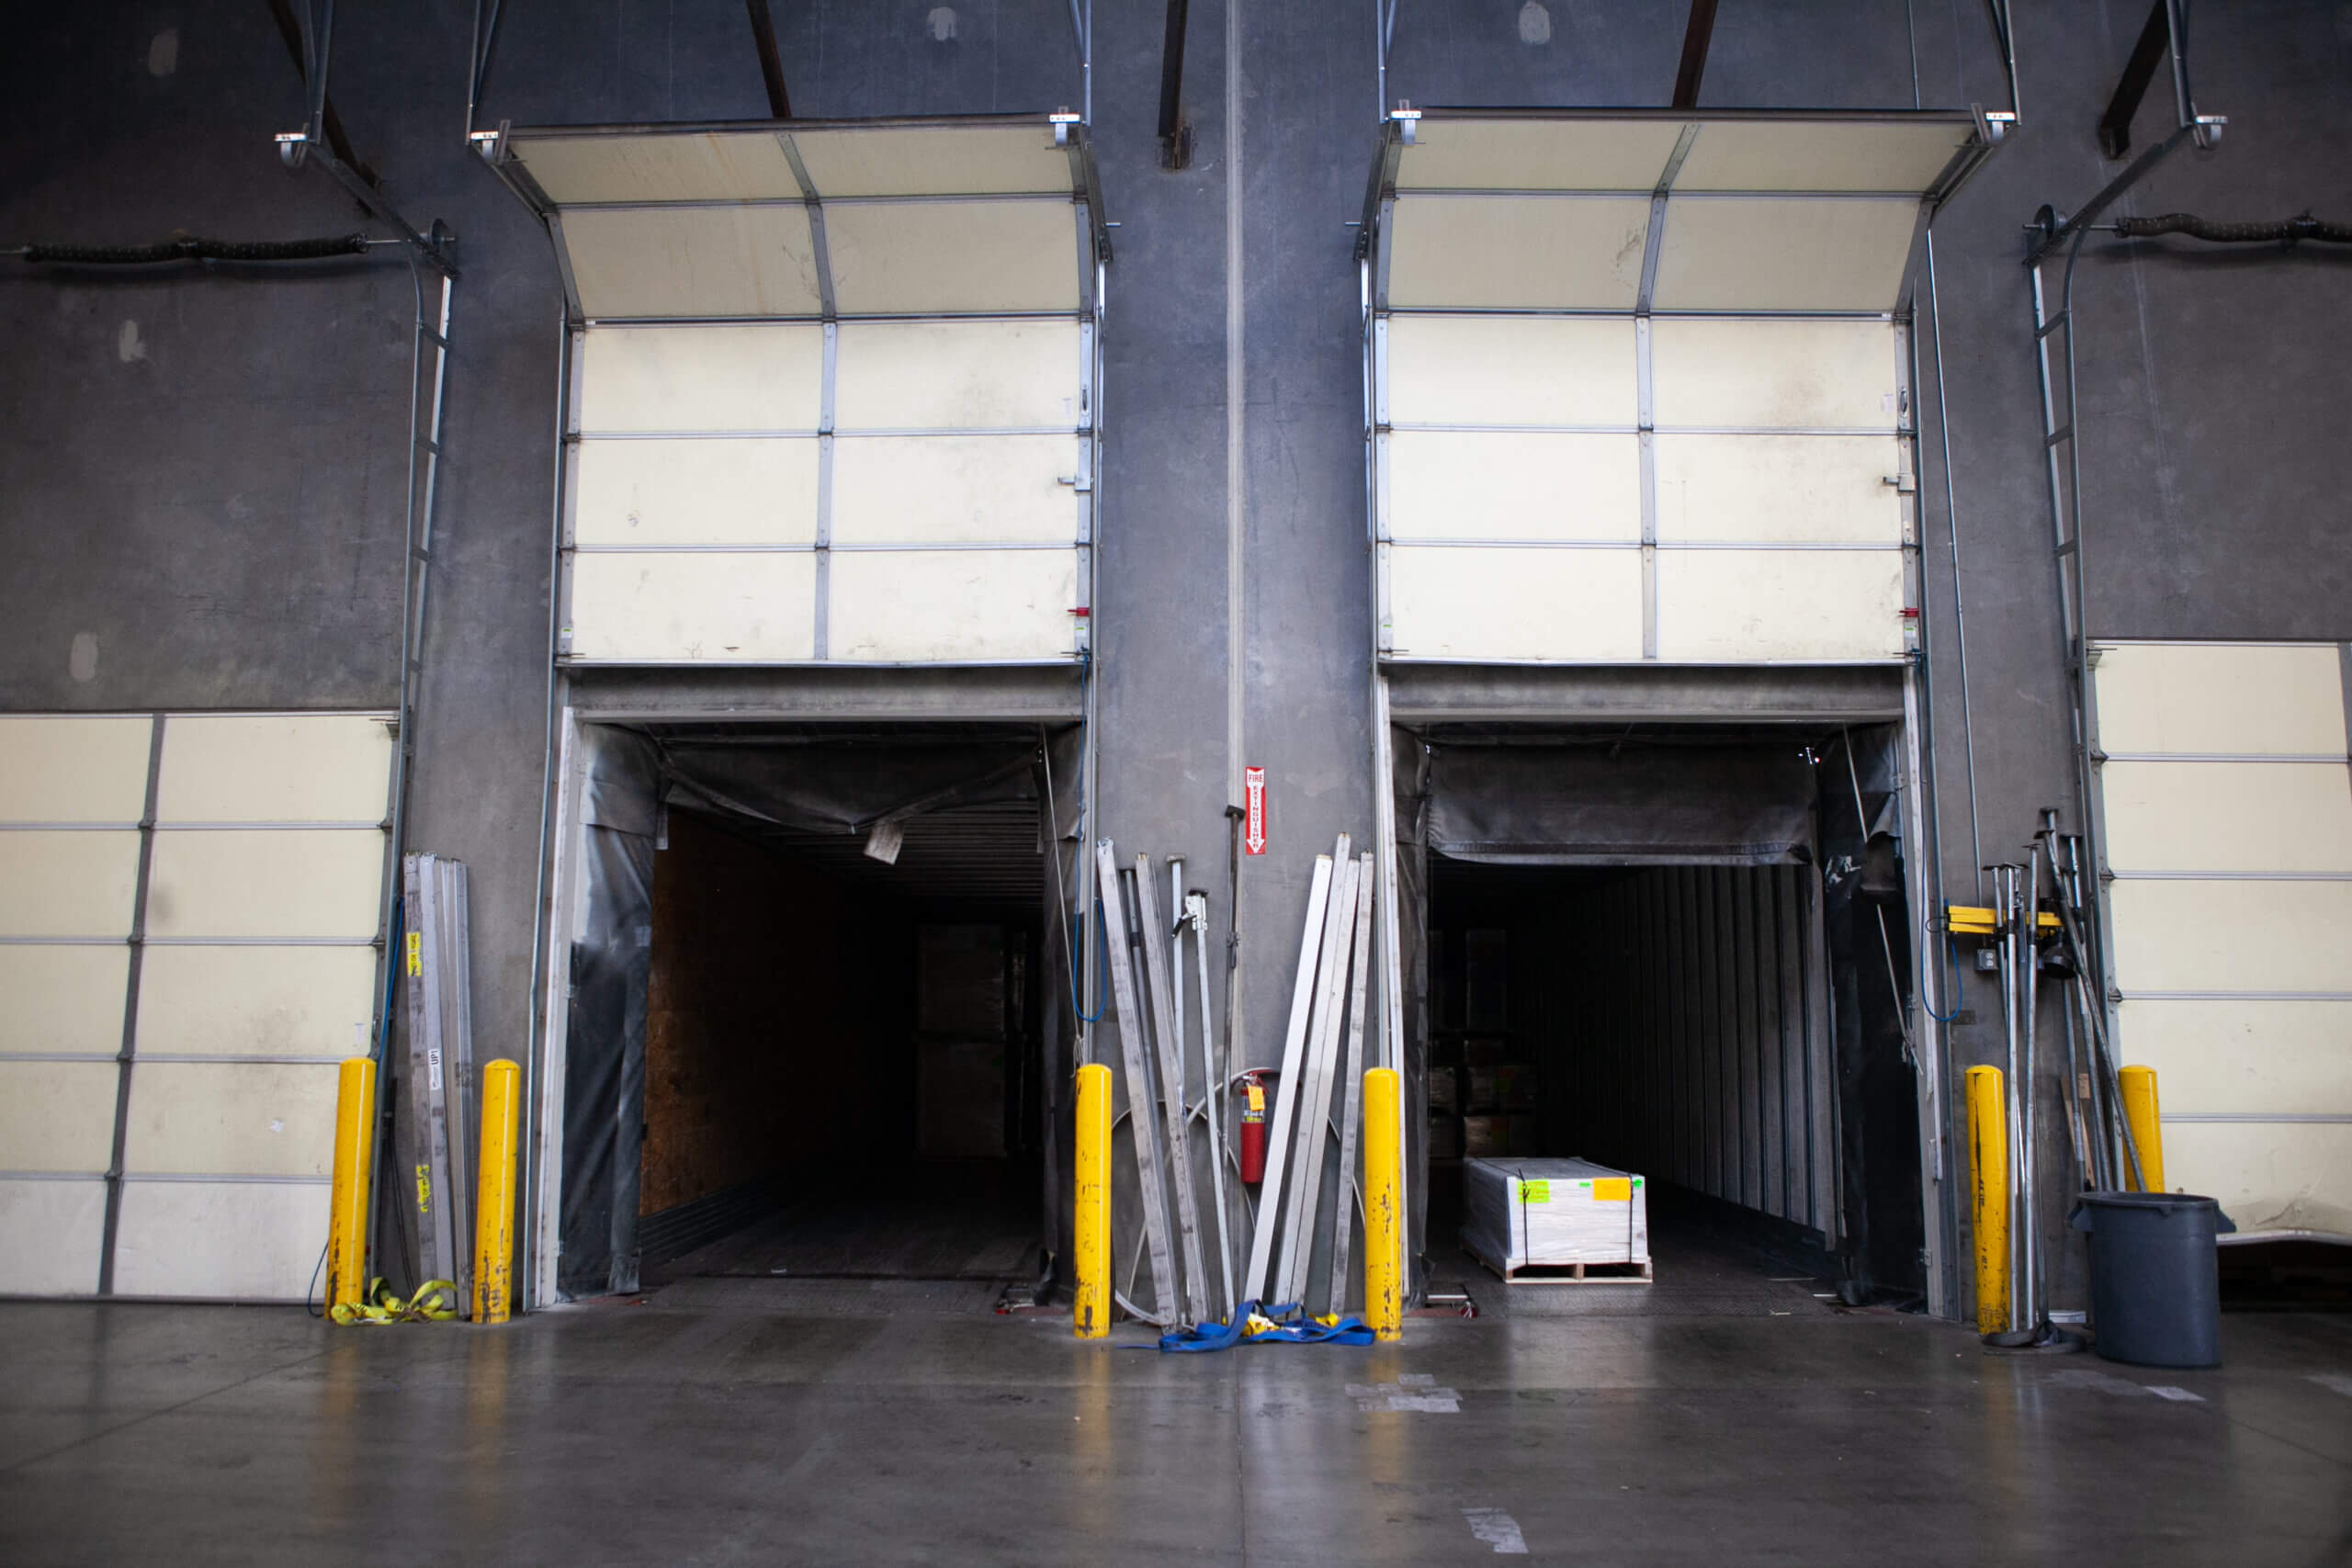 4 loading bays at the Phoenix distribution center with 2 garage doors open and 2 closed